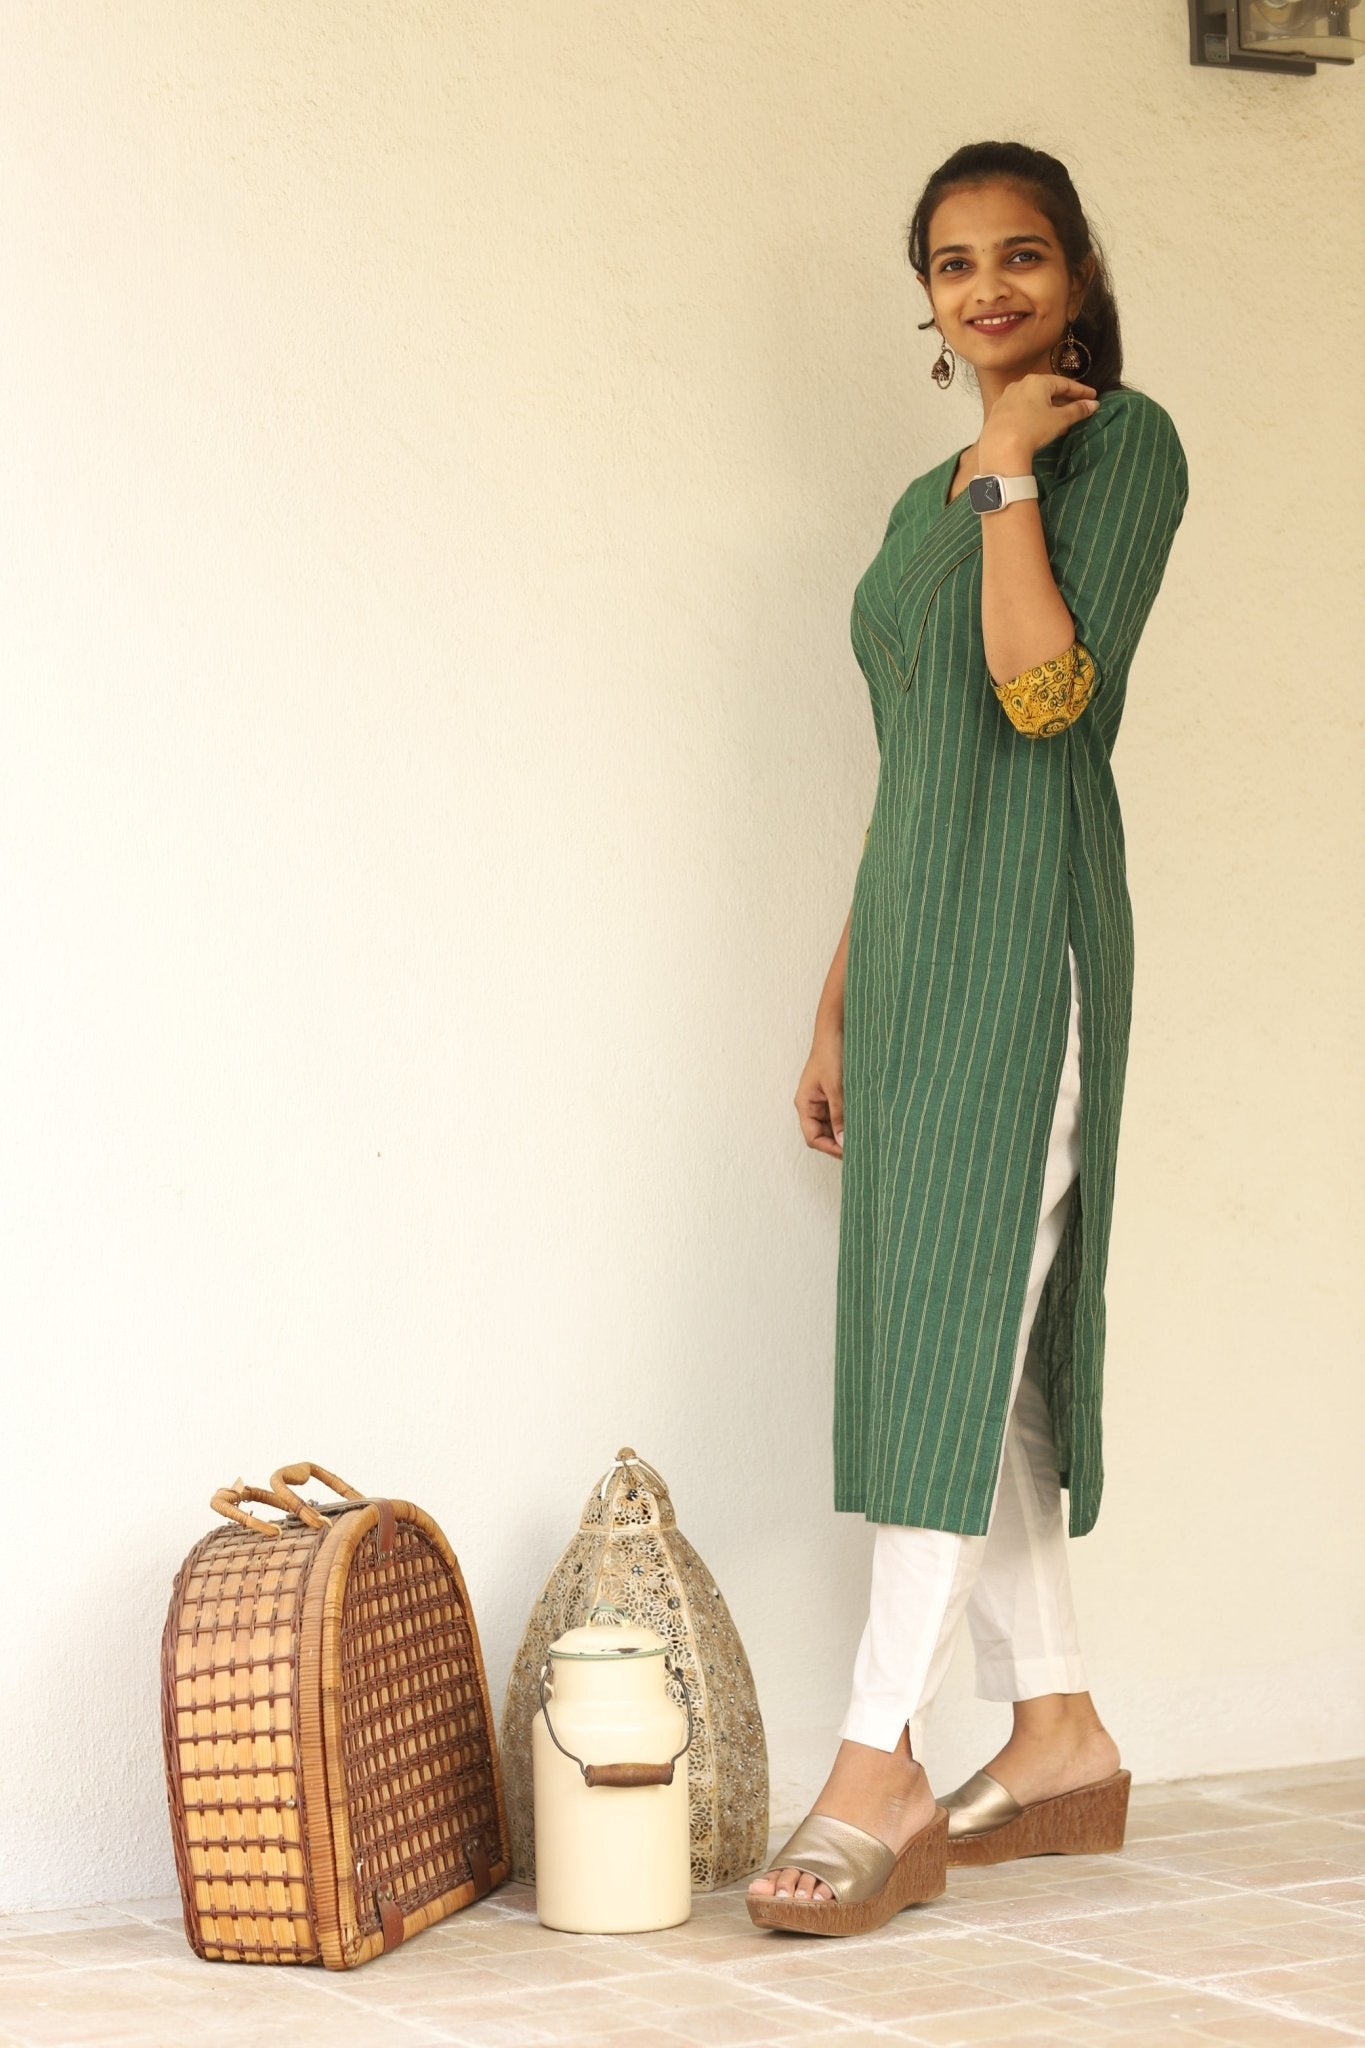 The model is posing with a green cotton Kurti with ajrakh detailing 